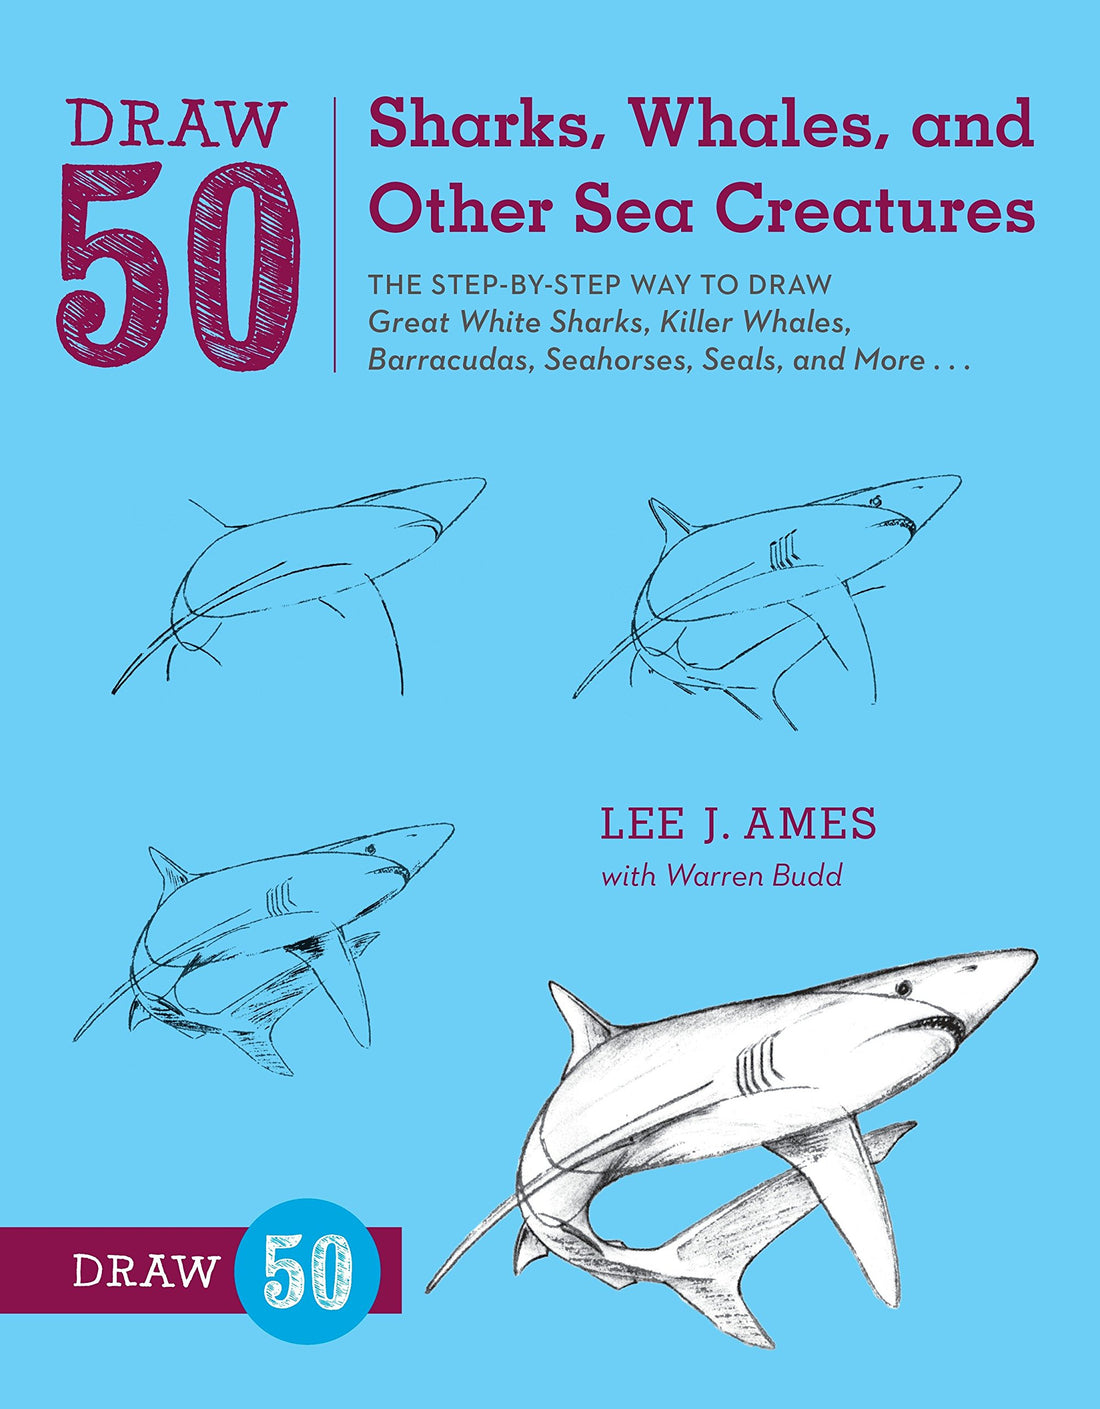 draw 50 sharks, whales, and other sea creatures